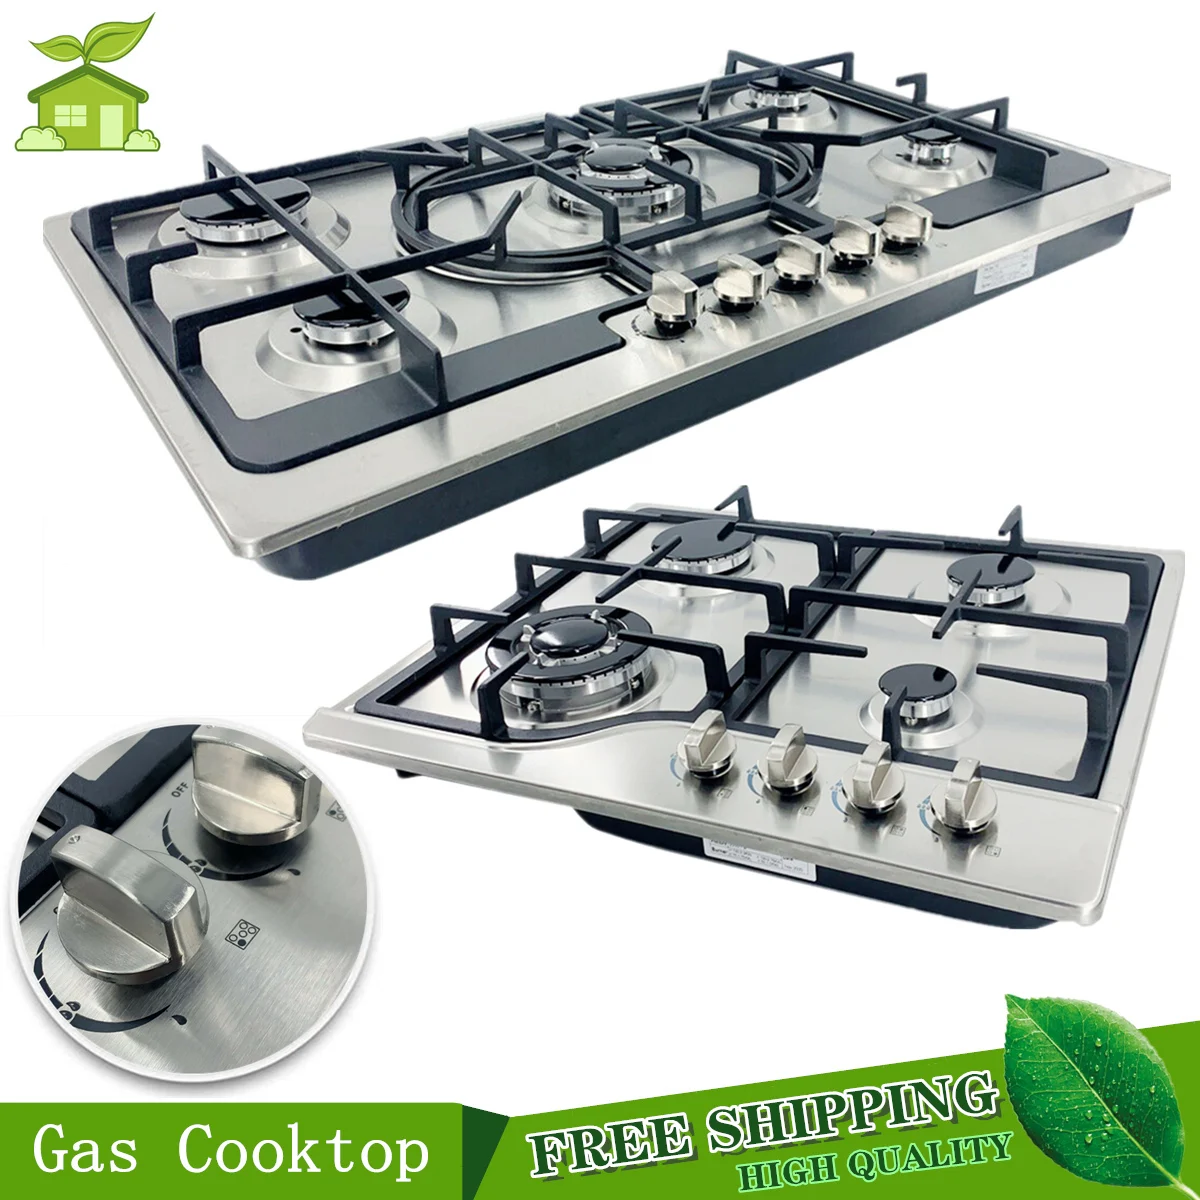 

NEW 4/5-Burner Gas Cooktop Built-in Natural/Propane Gas Stove Cooktop LPG/LNG Stainless Steel Cooktops Kitchen Cooking Appliance